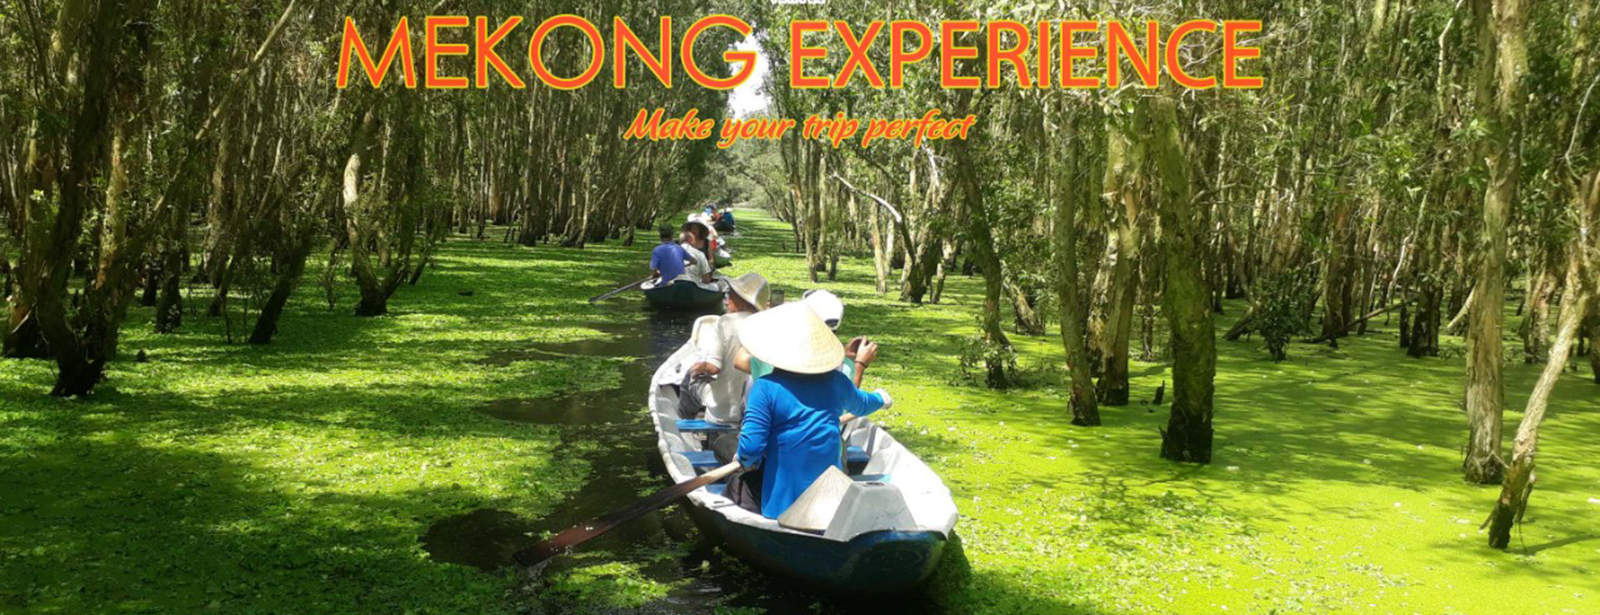 mekong experience about us